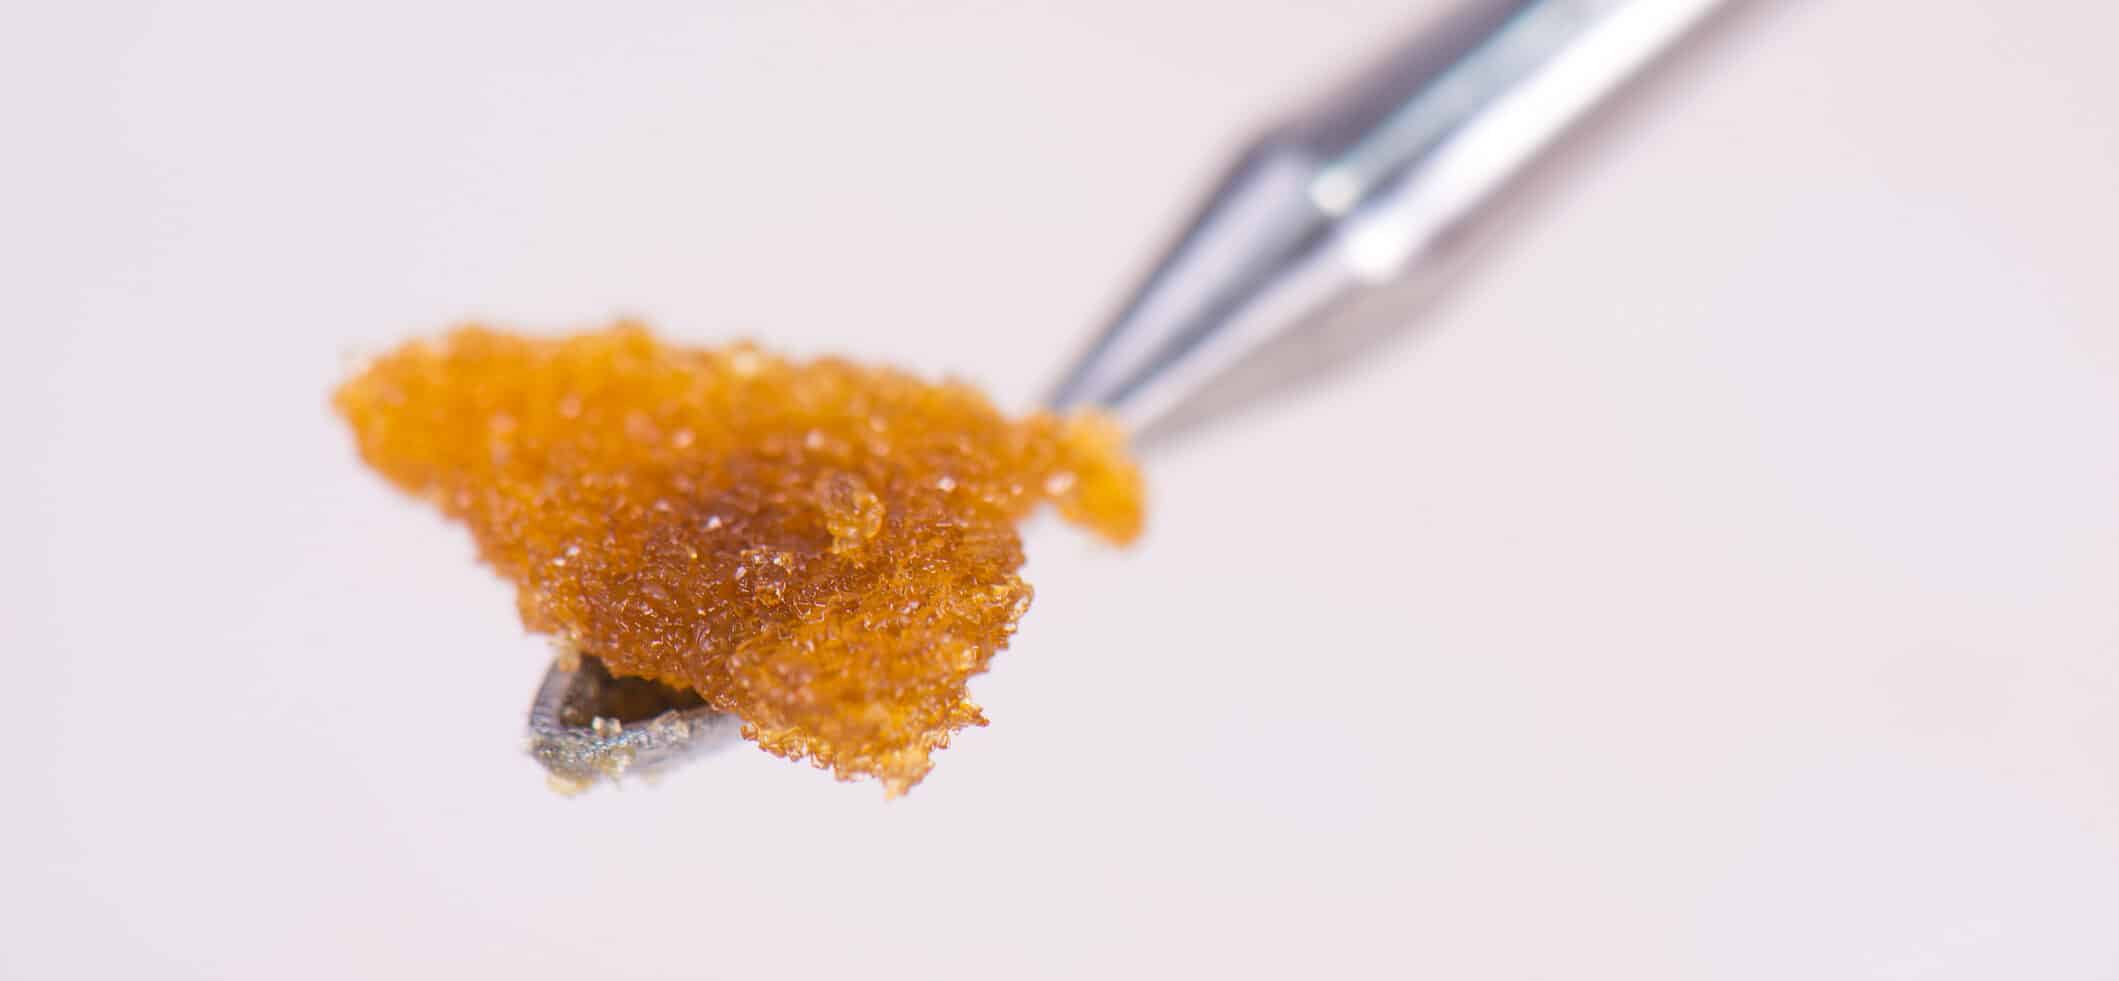 Shop The Best Budder, Batter, and Badder Concentrates in New England